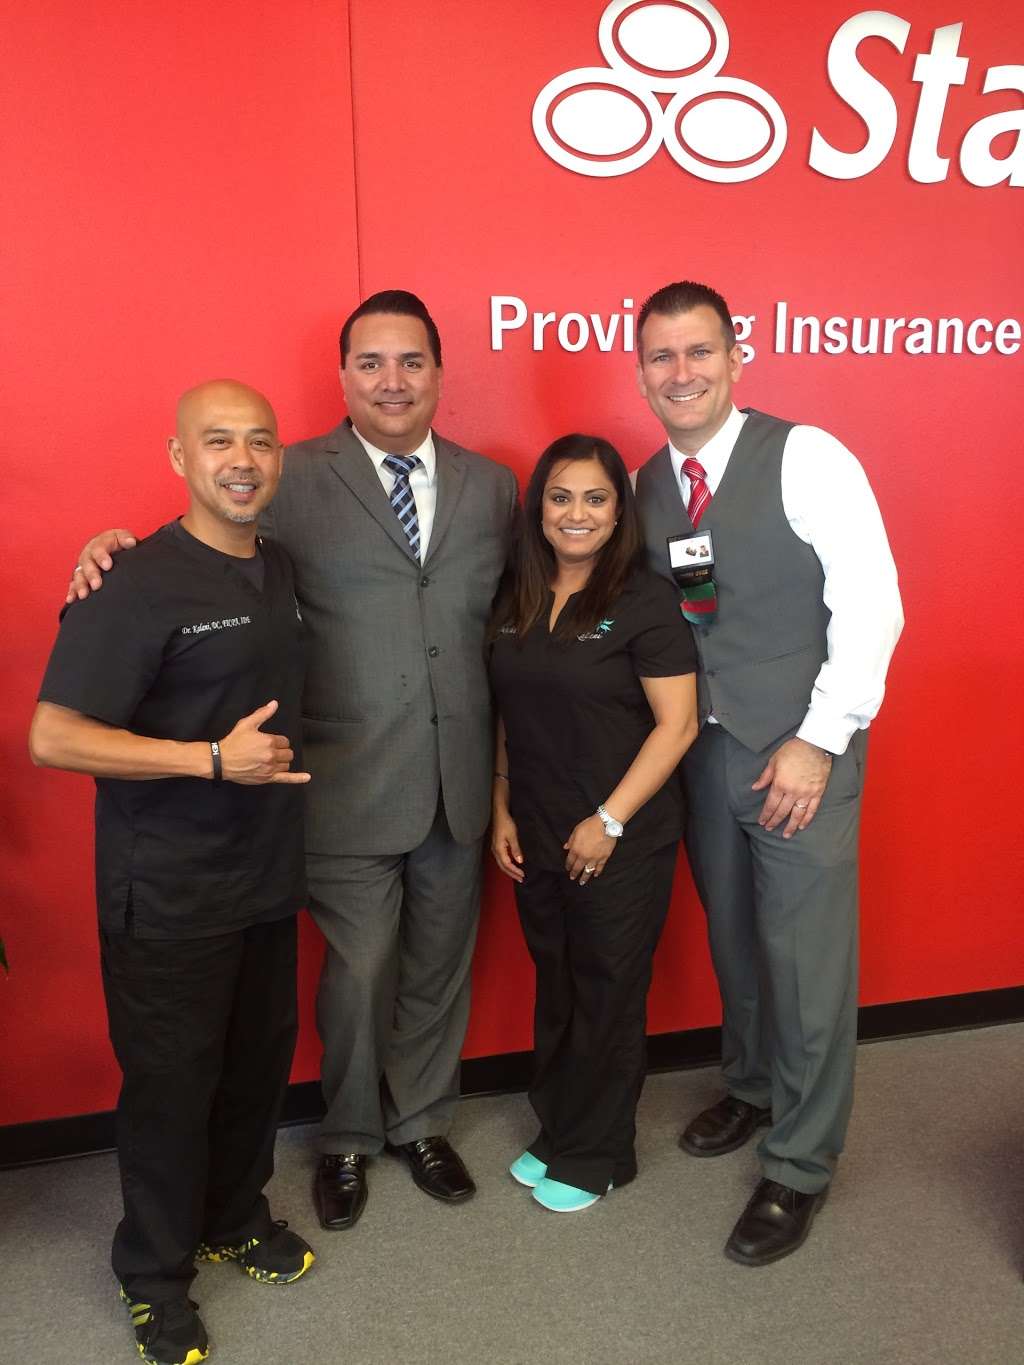 Ray Gonzales - State Farm Insurance Agent | 2711 S Rose Ave D101, Oxnard, CA 93033, USA | Phone: (805) 240-3100